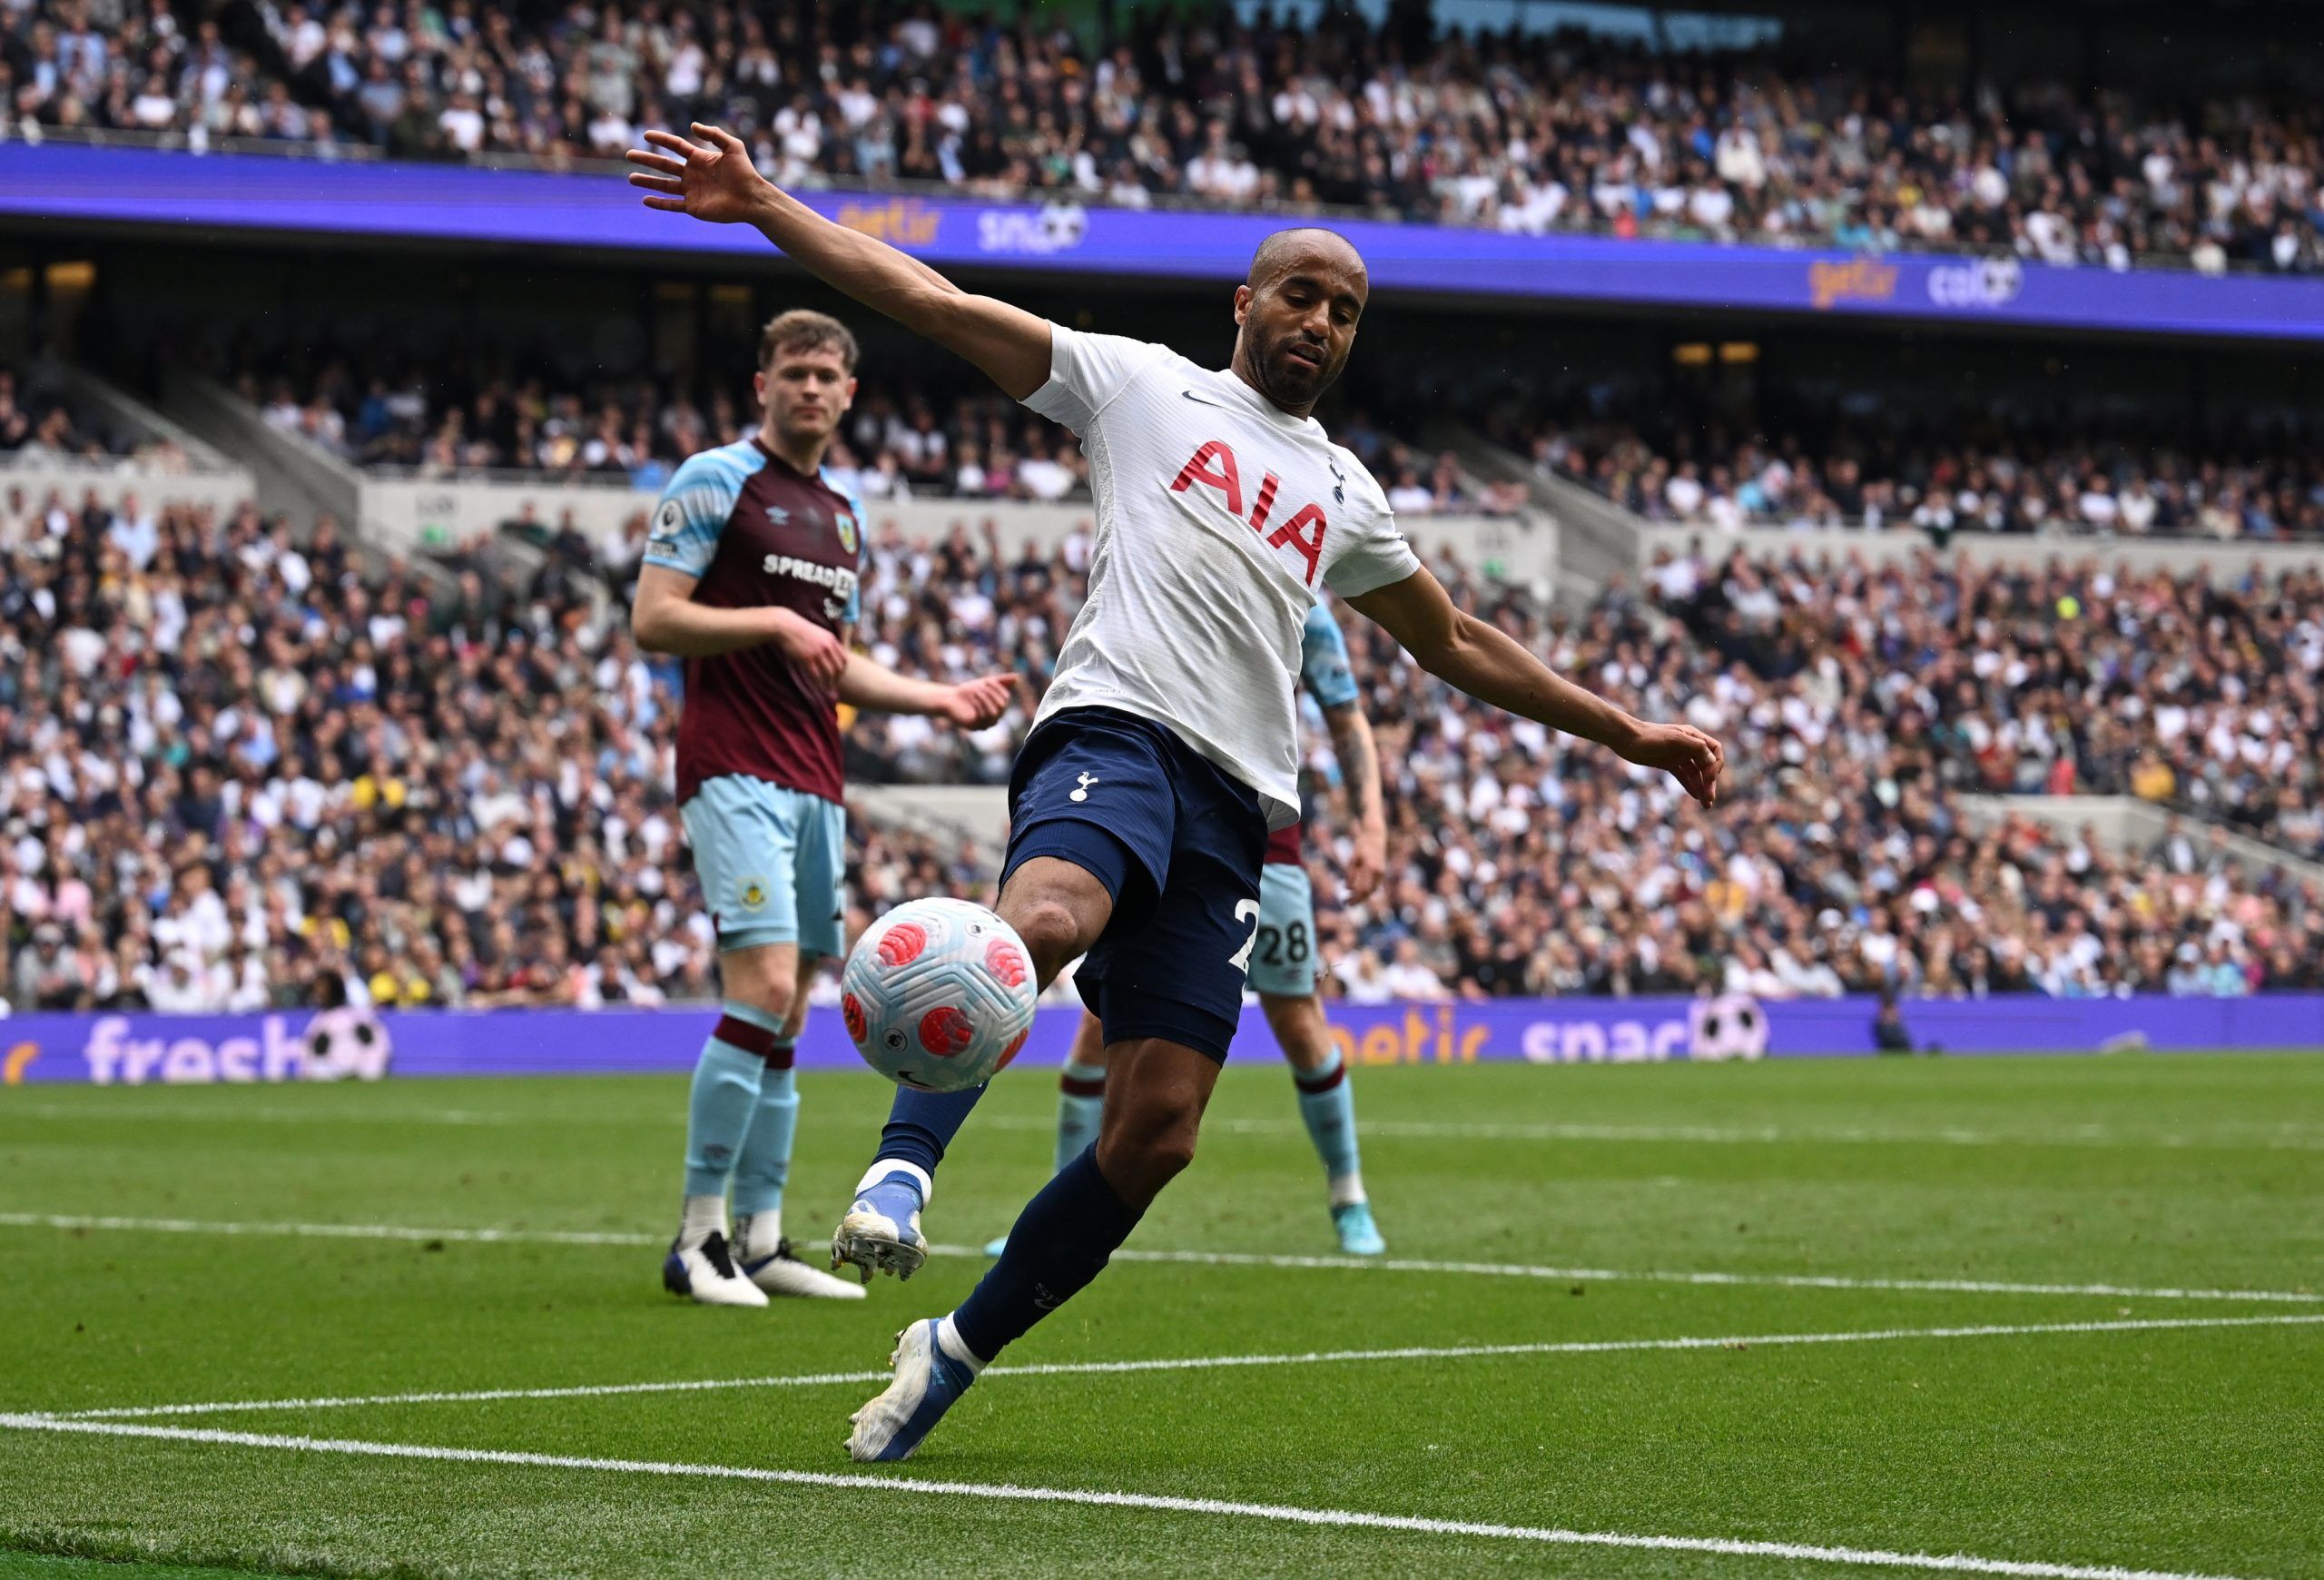 Soccer Football - Premier League - Tottenham Hotspur v Burnley - Tottenham Hotspur Stadium, London, Britain - May 15, 2022 Tottenham Hotspur's Lucas Moura in action REUTERS/Dylan Martinez EDITORIAL USE ONLY. No use with unauthorized audio, video, data, fixture lists, club/league logos or 'live' services. Online in-match use limited to 75 images, no video emulation. No use in betting, games or single club /league/player publications.  Please contact your account representative for further details